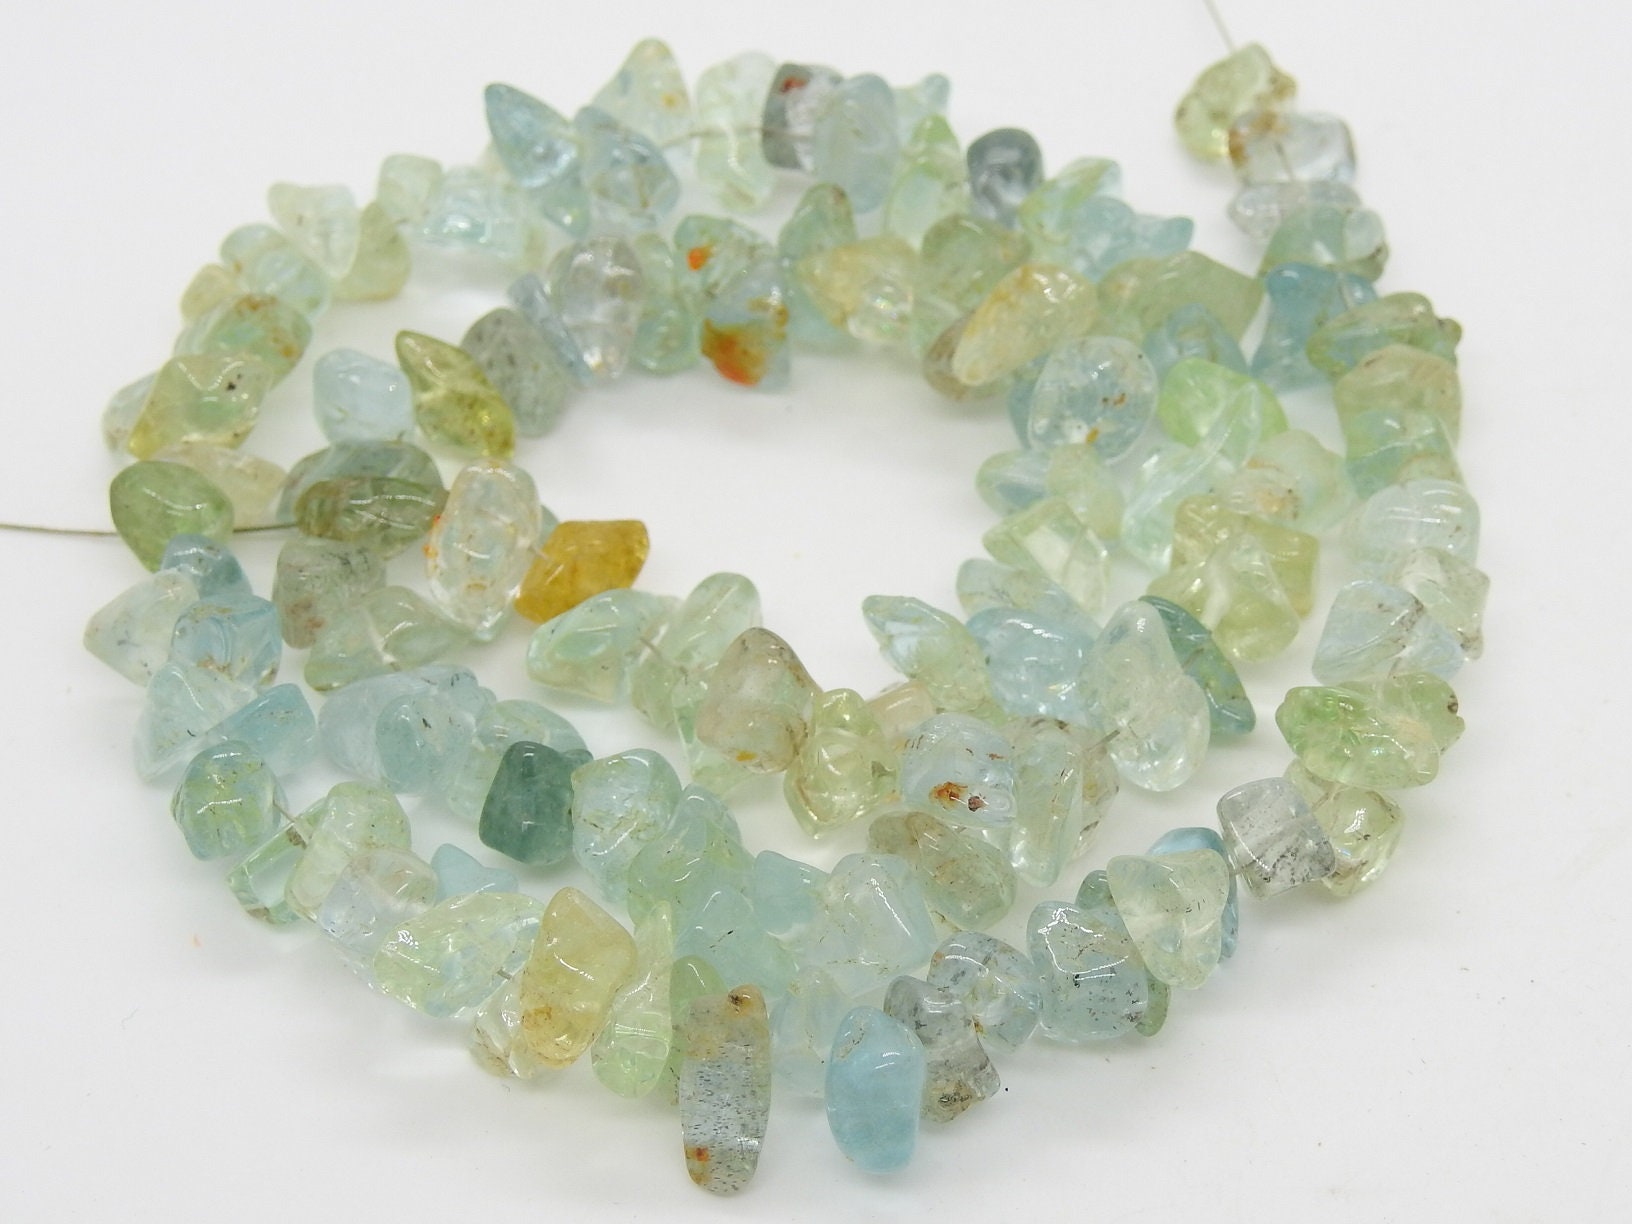 100%Natural,Aquamarine Polished Rough Beads,Anklets,Chips,Uncut 10X5To5X4MM Approx,Wholesale Price,New Arrival RB1 | Save 33% - Rajasthan Living 23